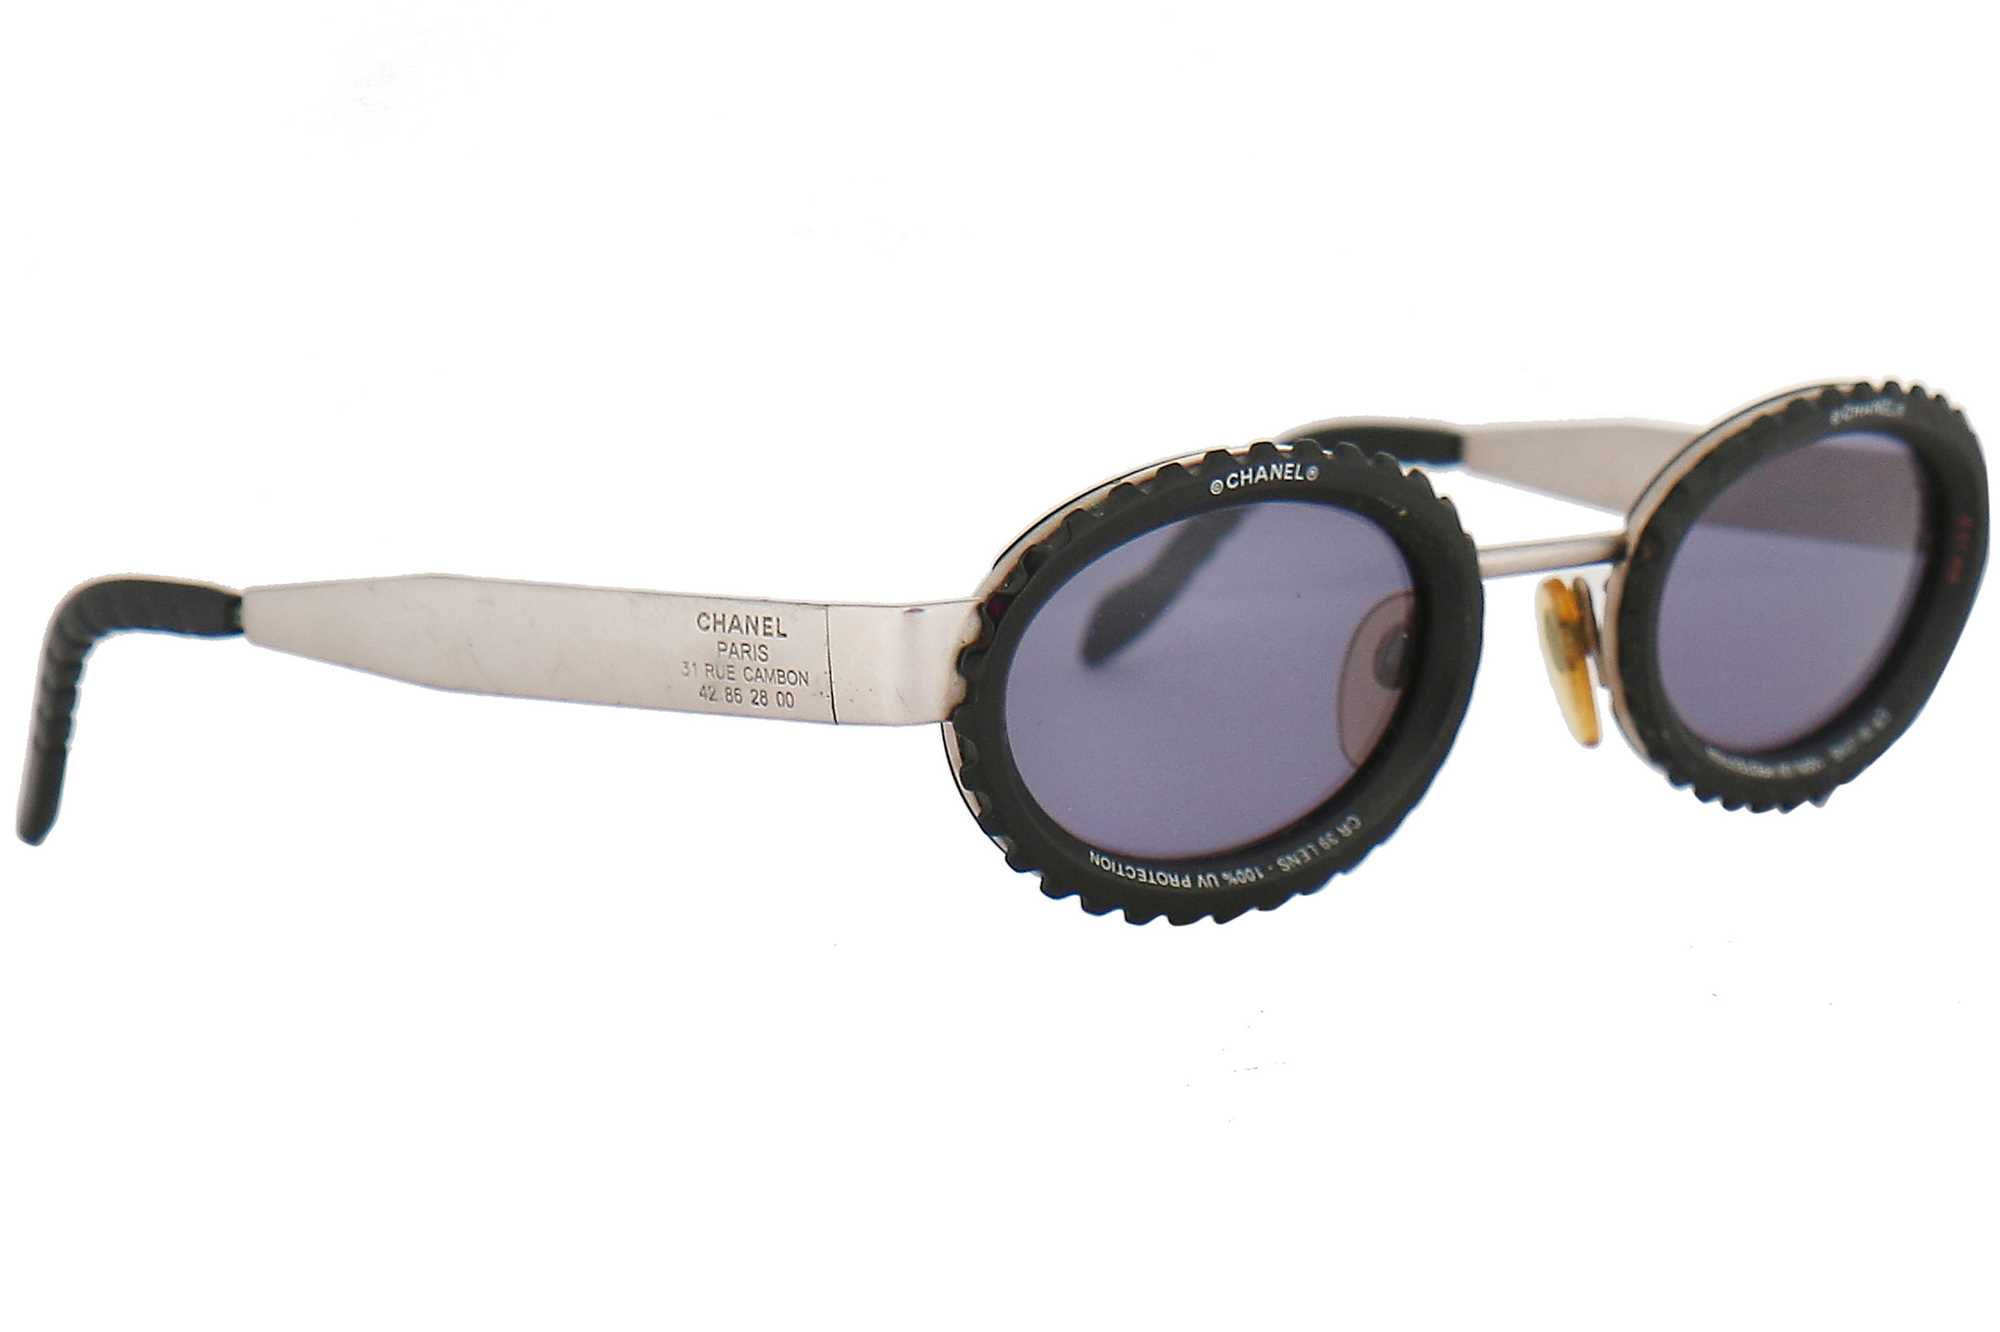 VINTAGE CHANEL RARE CAMERA LENS ROUND SUNGLASSES ❤ liked on